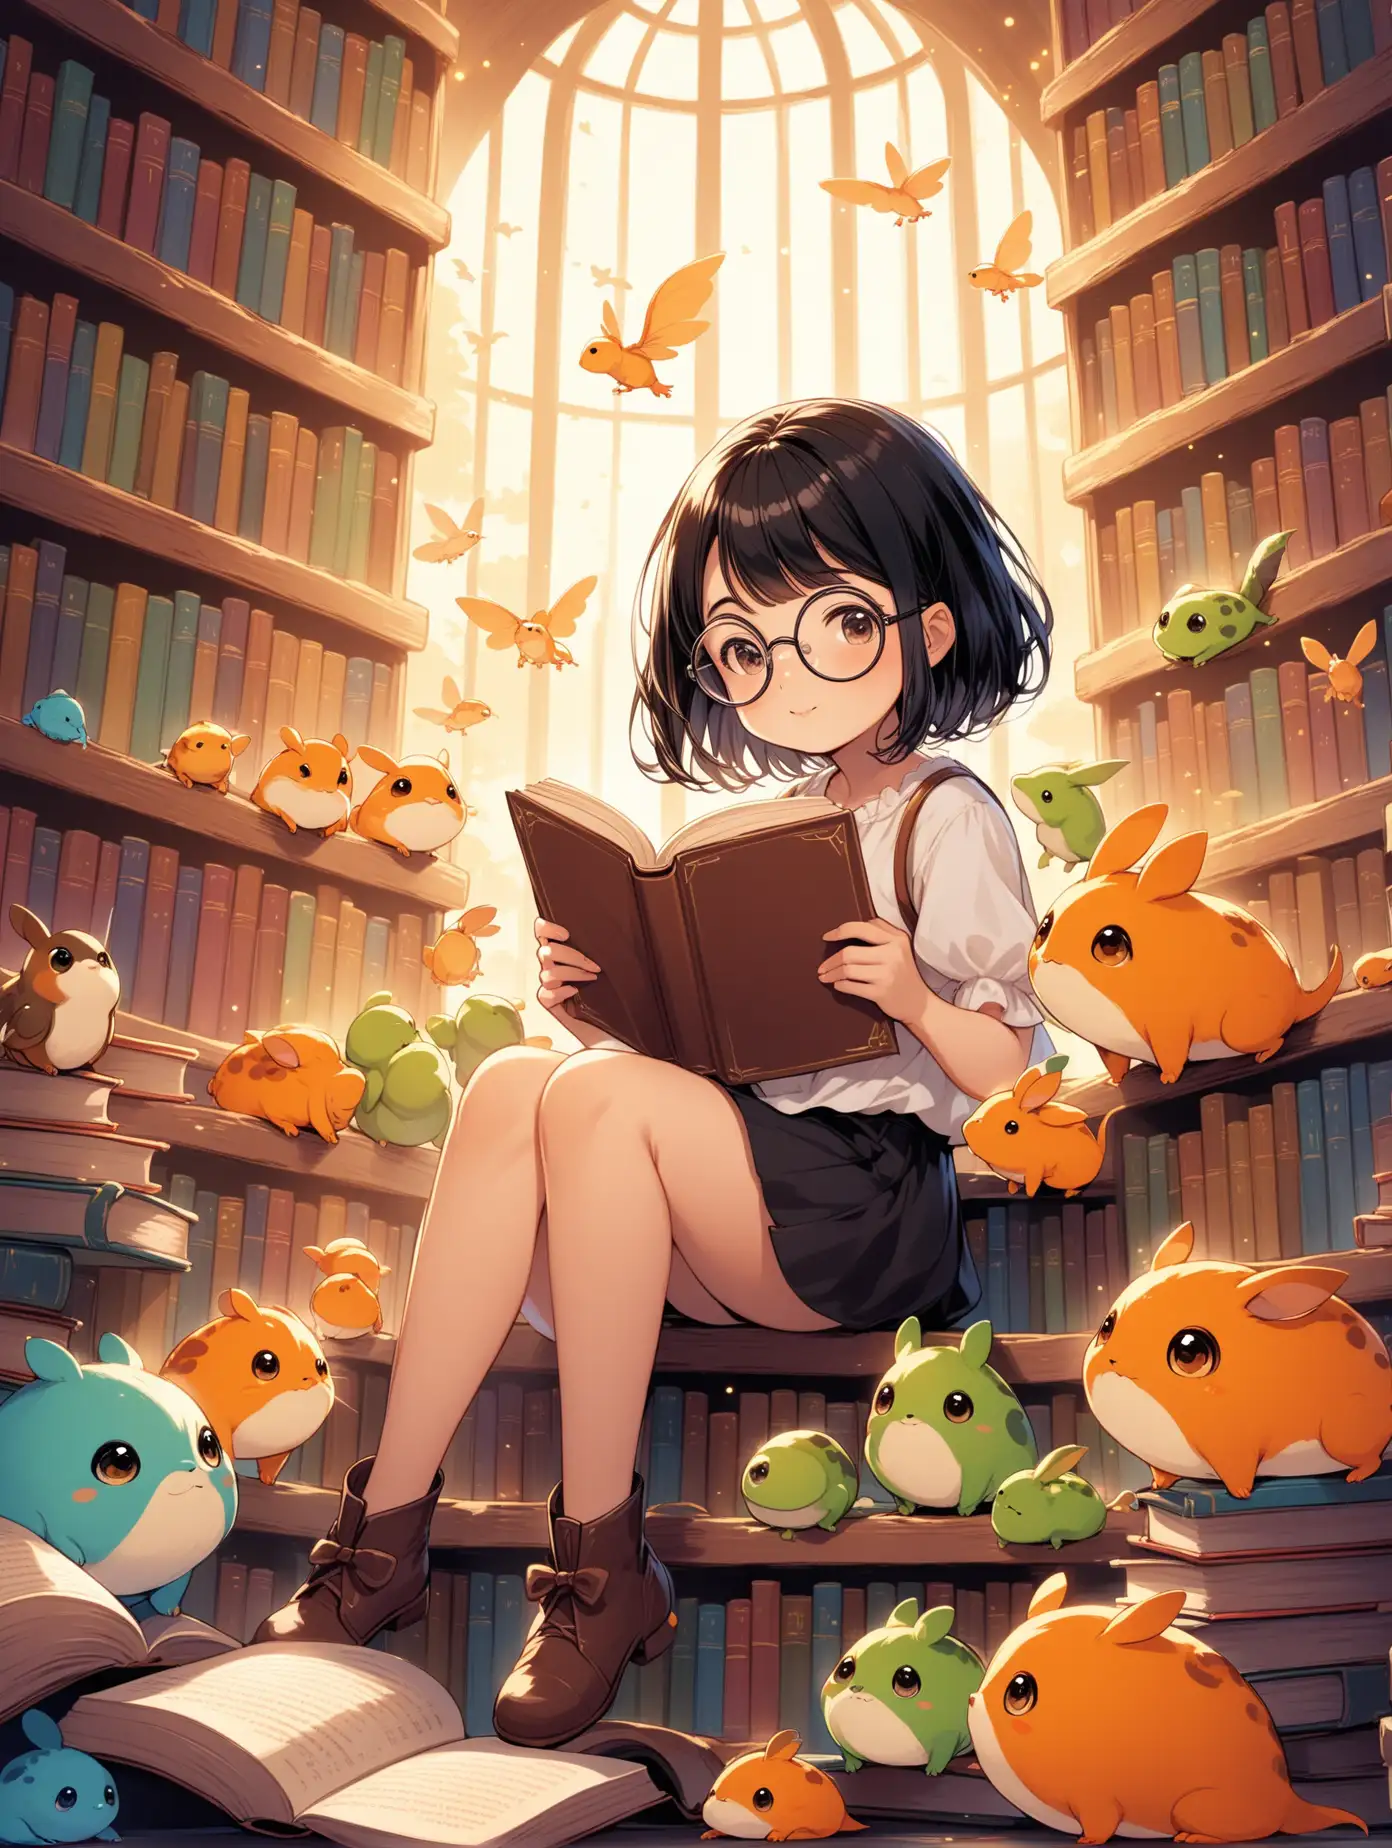 Adorable Cartoon Girl with Round Glasses Surrounded by Creatures in a Fantasy Library